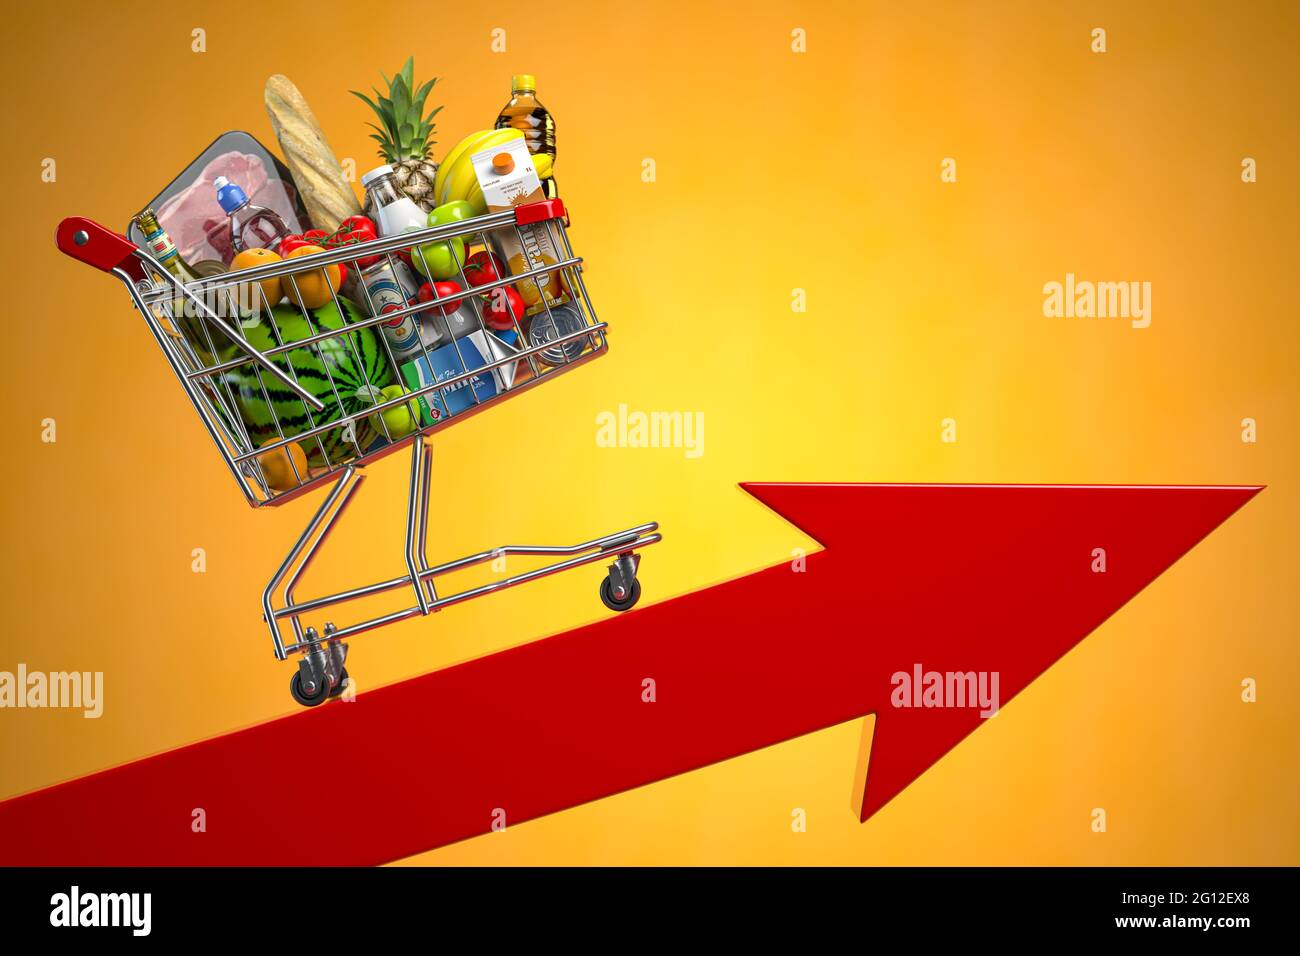 Inflation, growth of food sales, growth of market basket or consumer price index concept. Shopping basket with foods on arrow. 3d illustration. Stock Photo